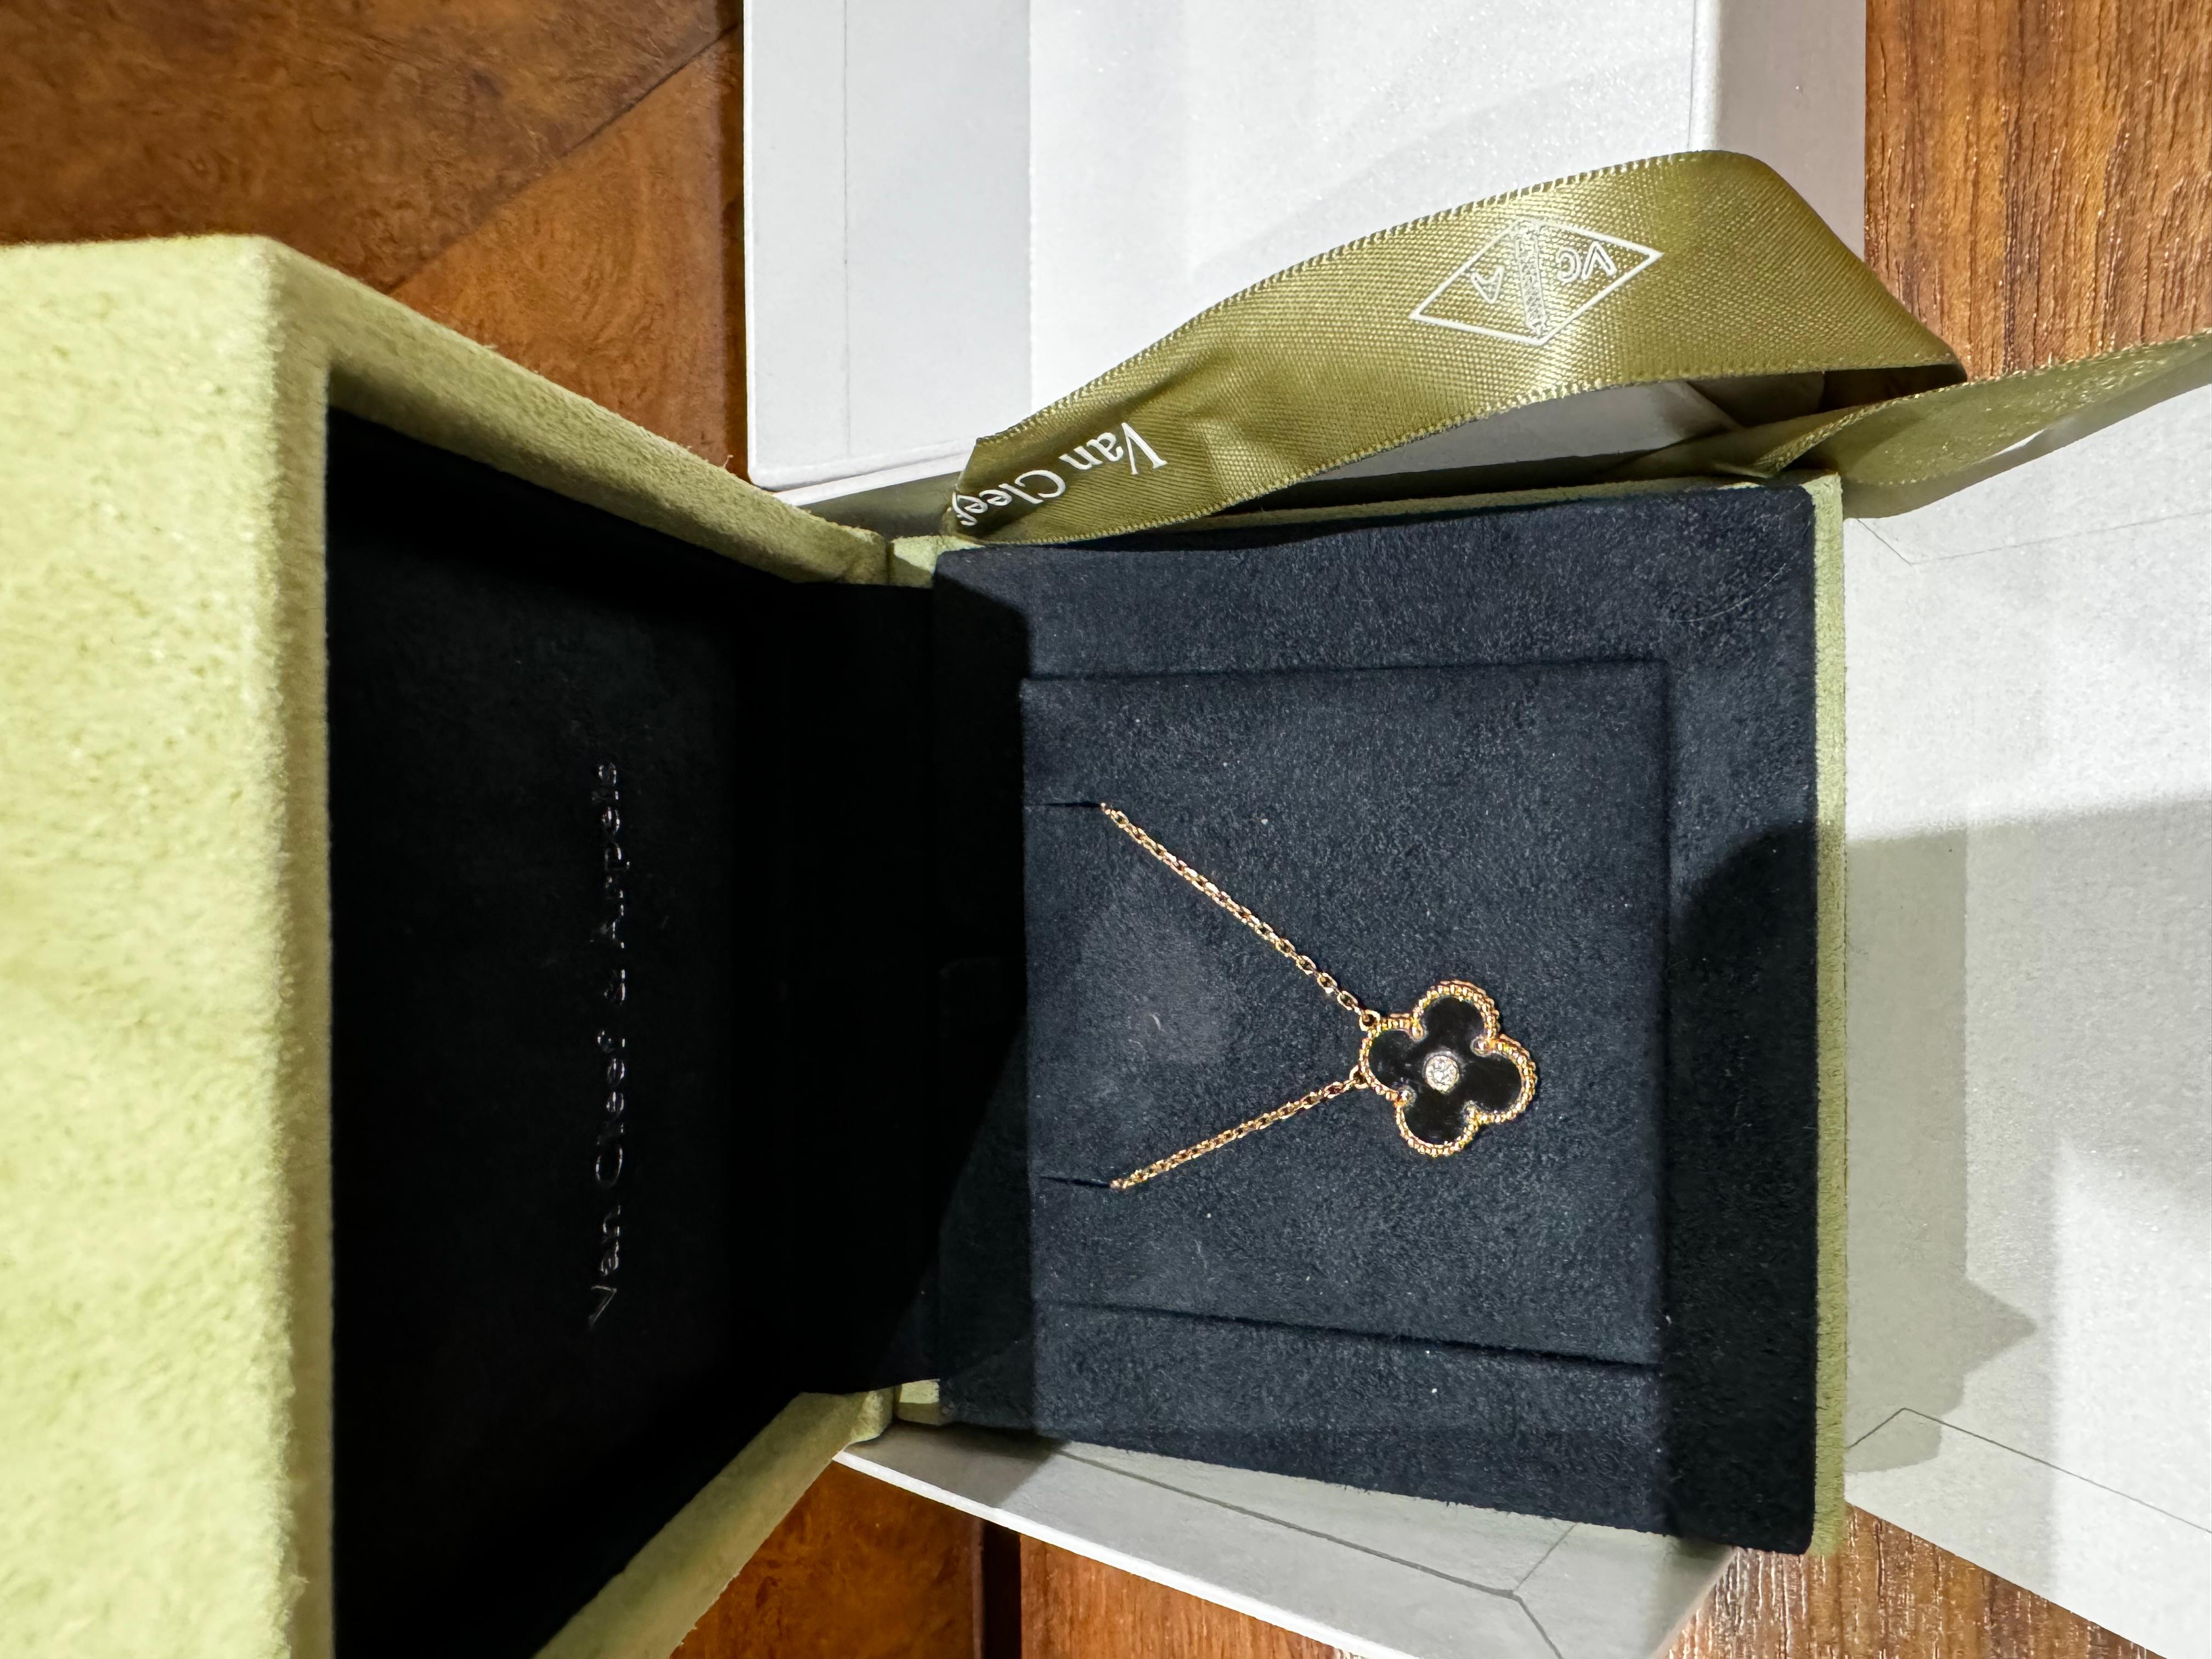 Van Cleef and Arpels Alhambra 2016 Holiday Diamond Onyx Pendant Necklace. Comes with original box and packaging.  VCA holiday pendants are collectible and onyx is one of the most resistant and sought after ones. 